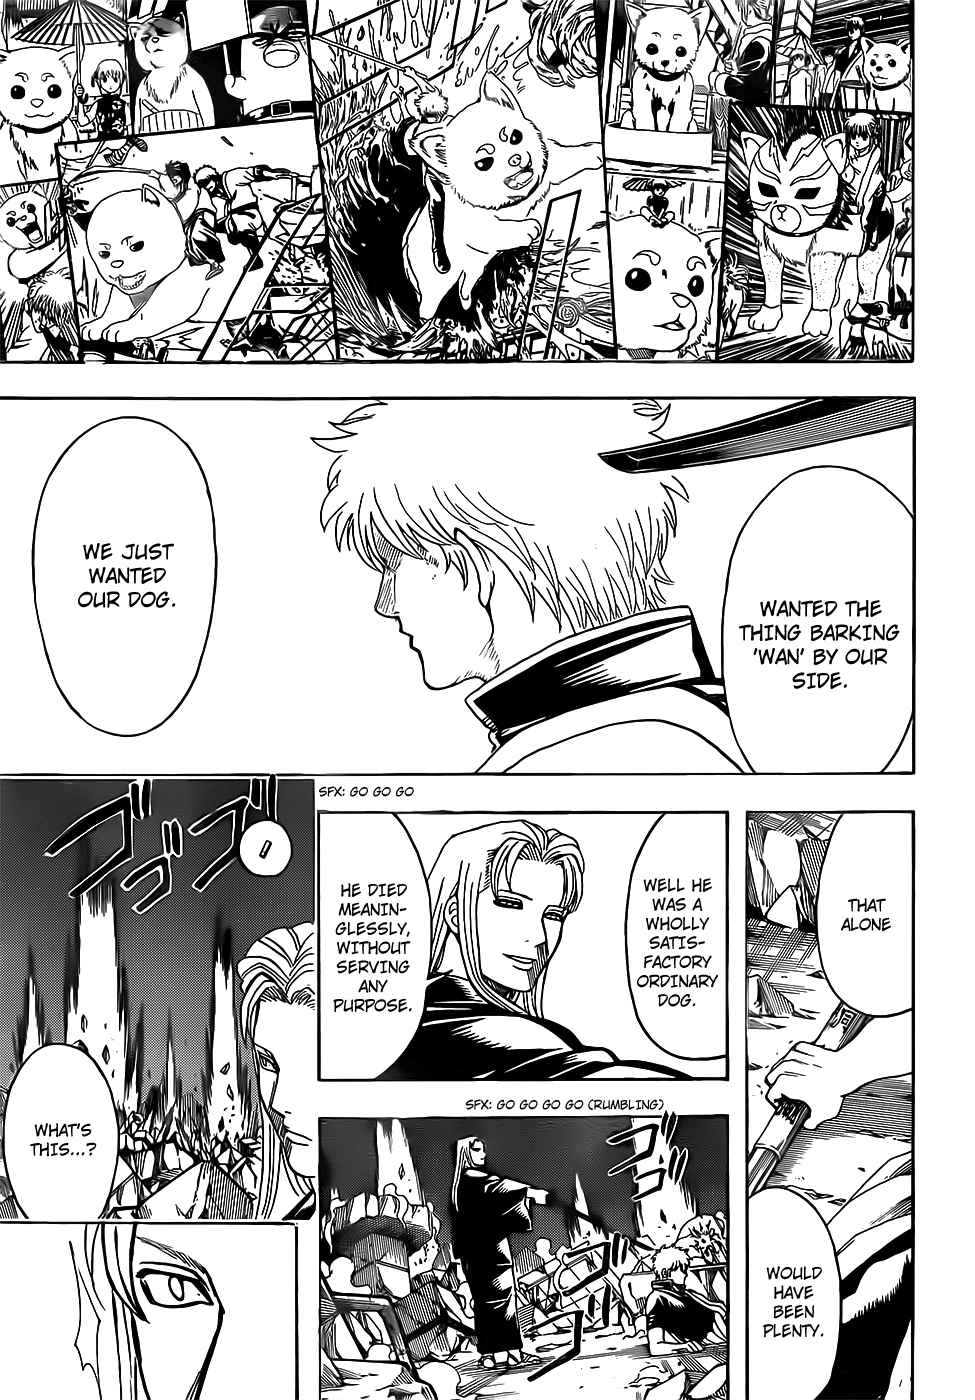 Gintama chapter 658 page 16